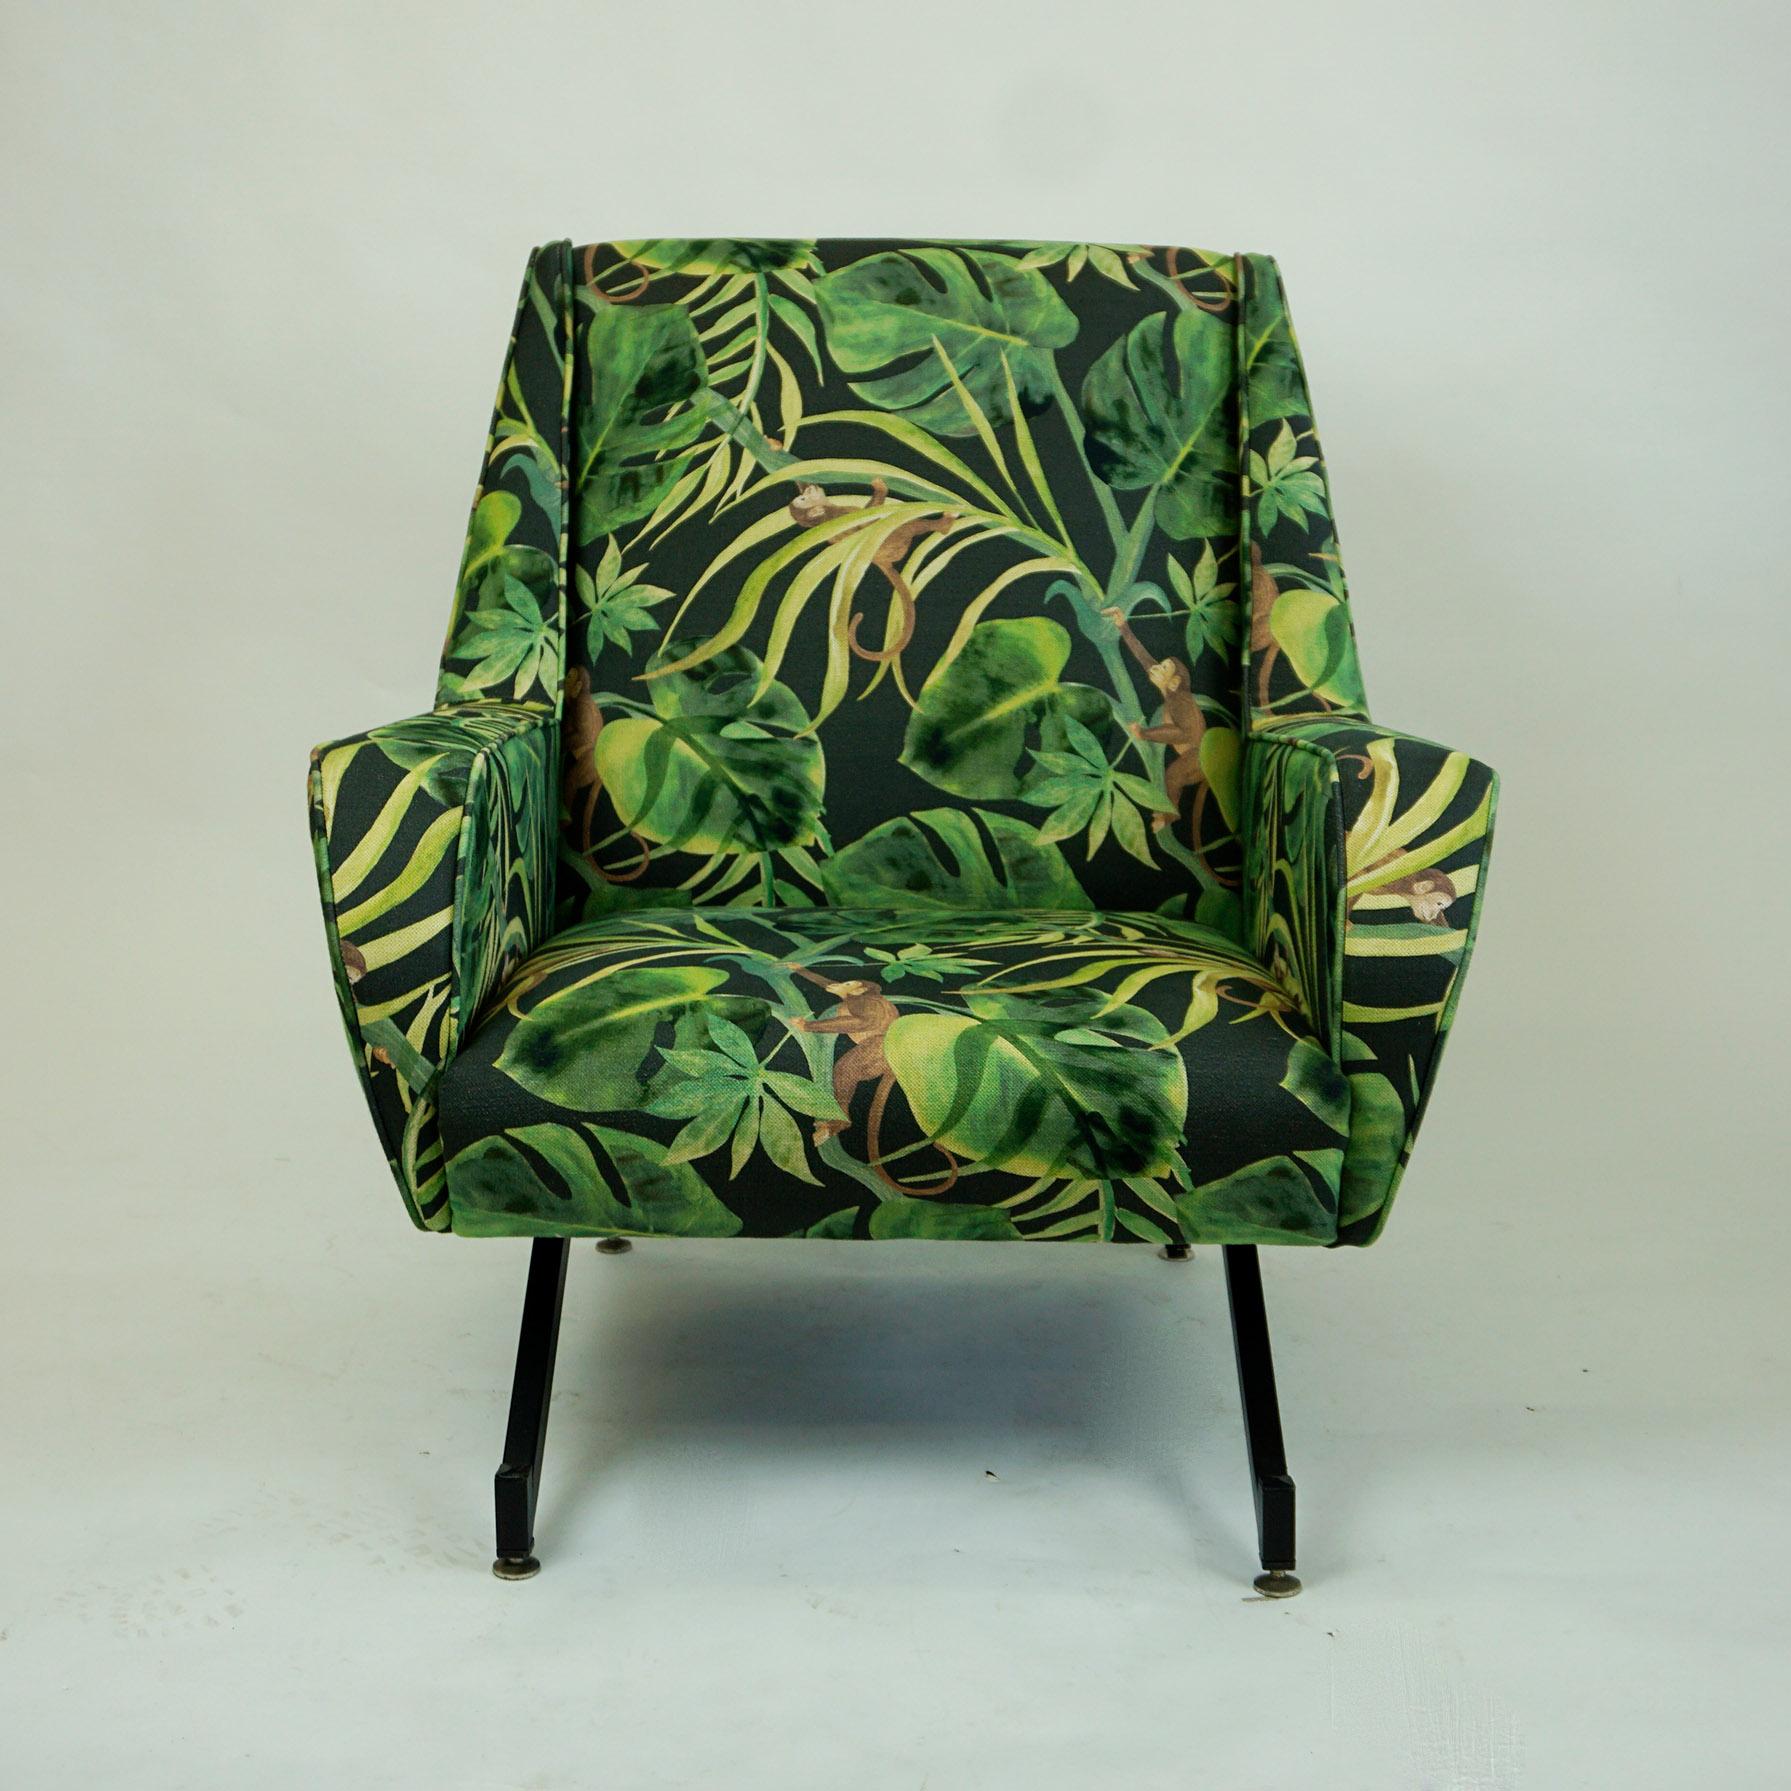 Lacquered Italian Midcentury Black Metal and Green Floral and Ape Fabric Armchair